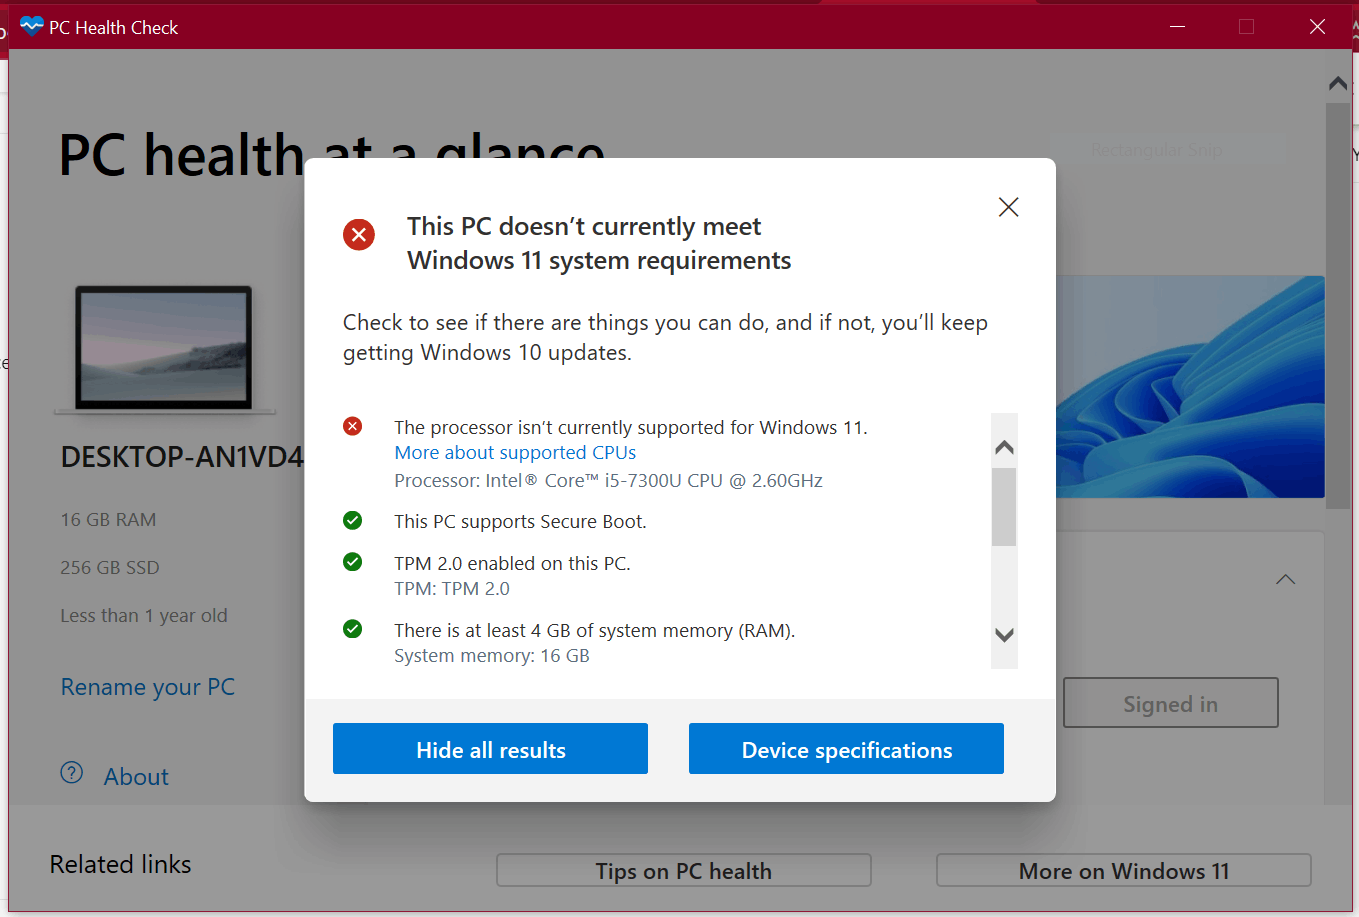 for windows 11 upgrade, PC Health check shows my CPU eligible under Windows 7, but not... 150d670d-497e-4034-a7a5-91b6412f4f9d?upload=true.png